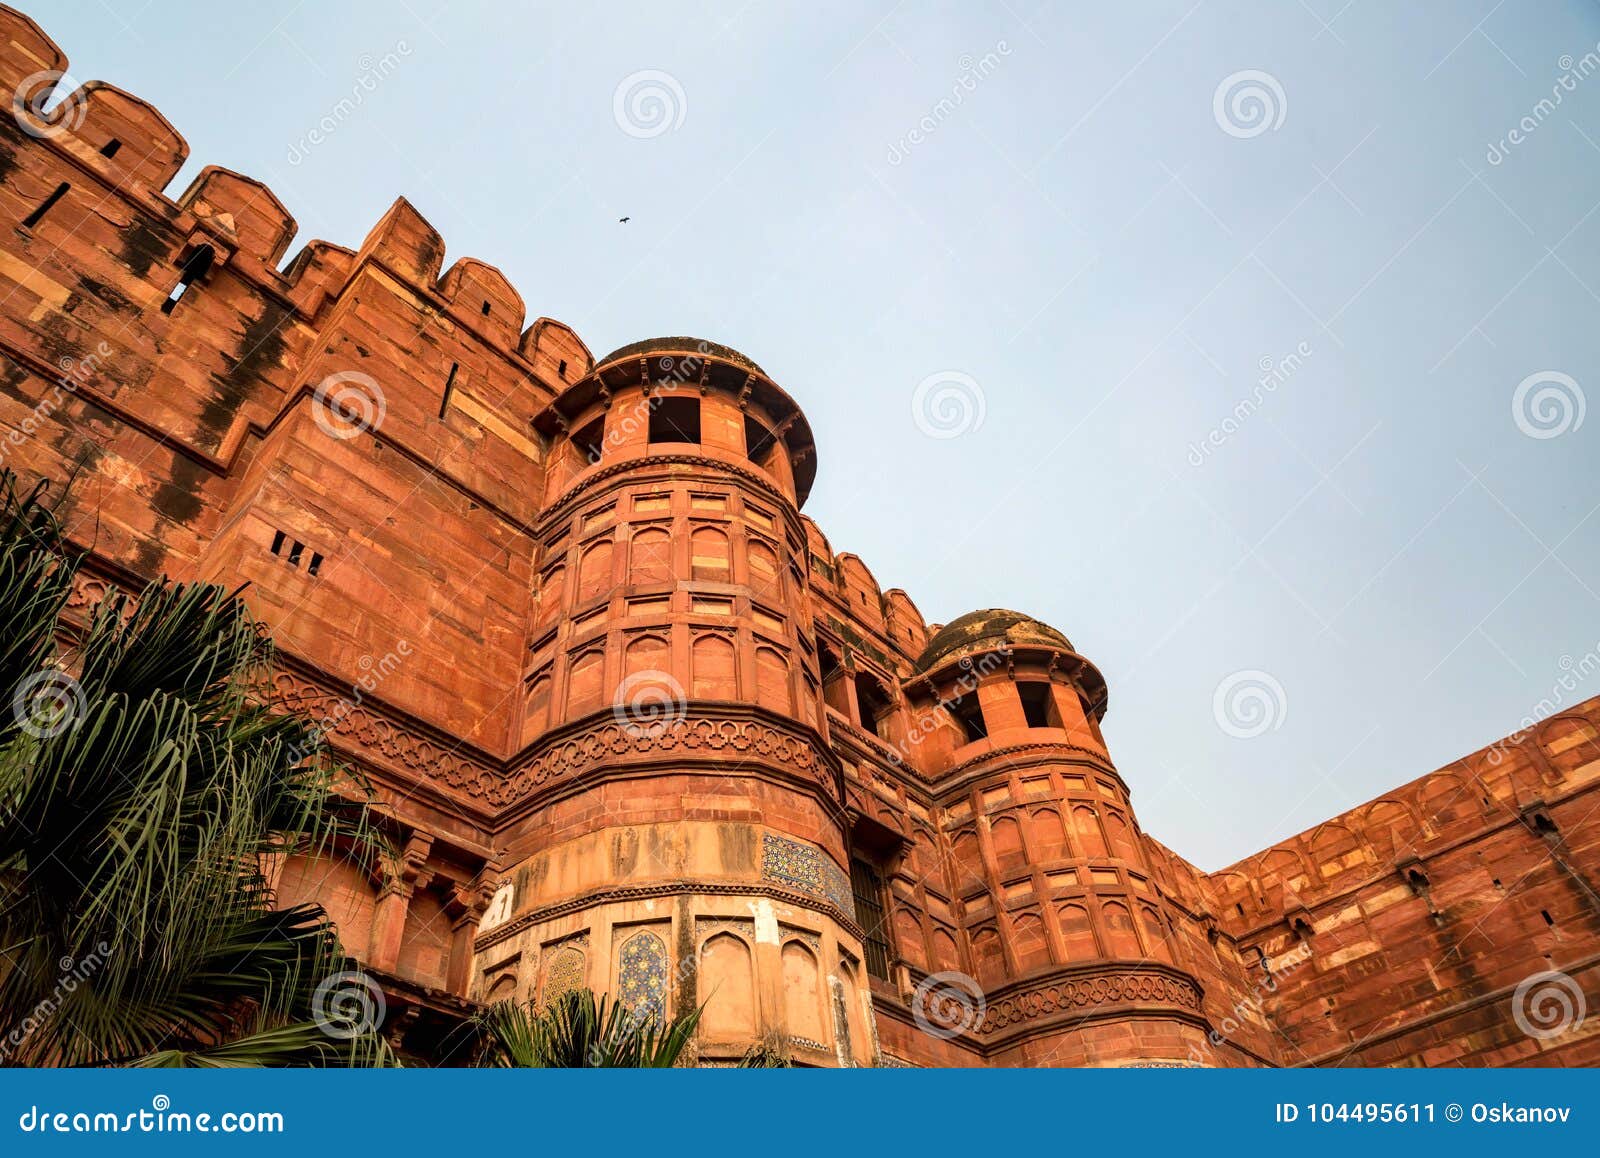 Red Fort Of Agra Built By